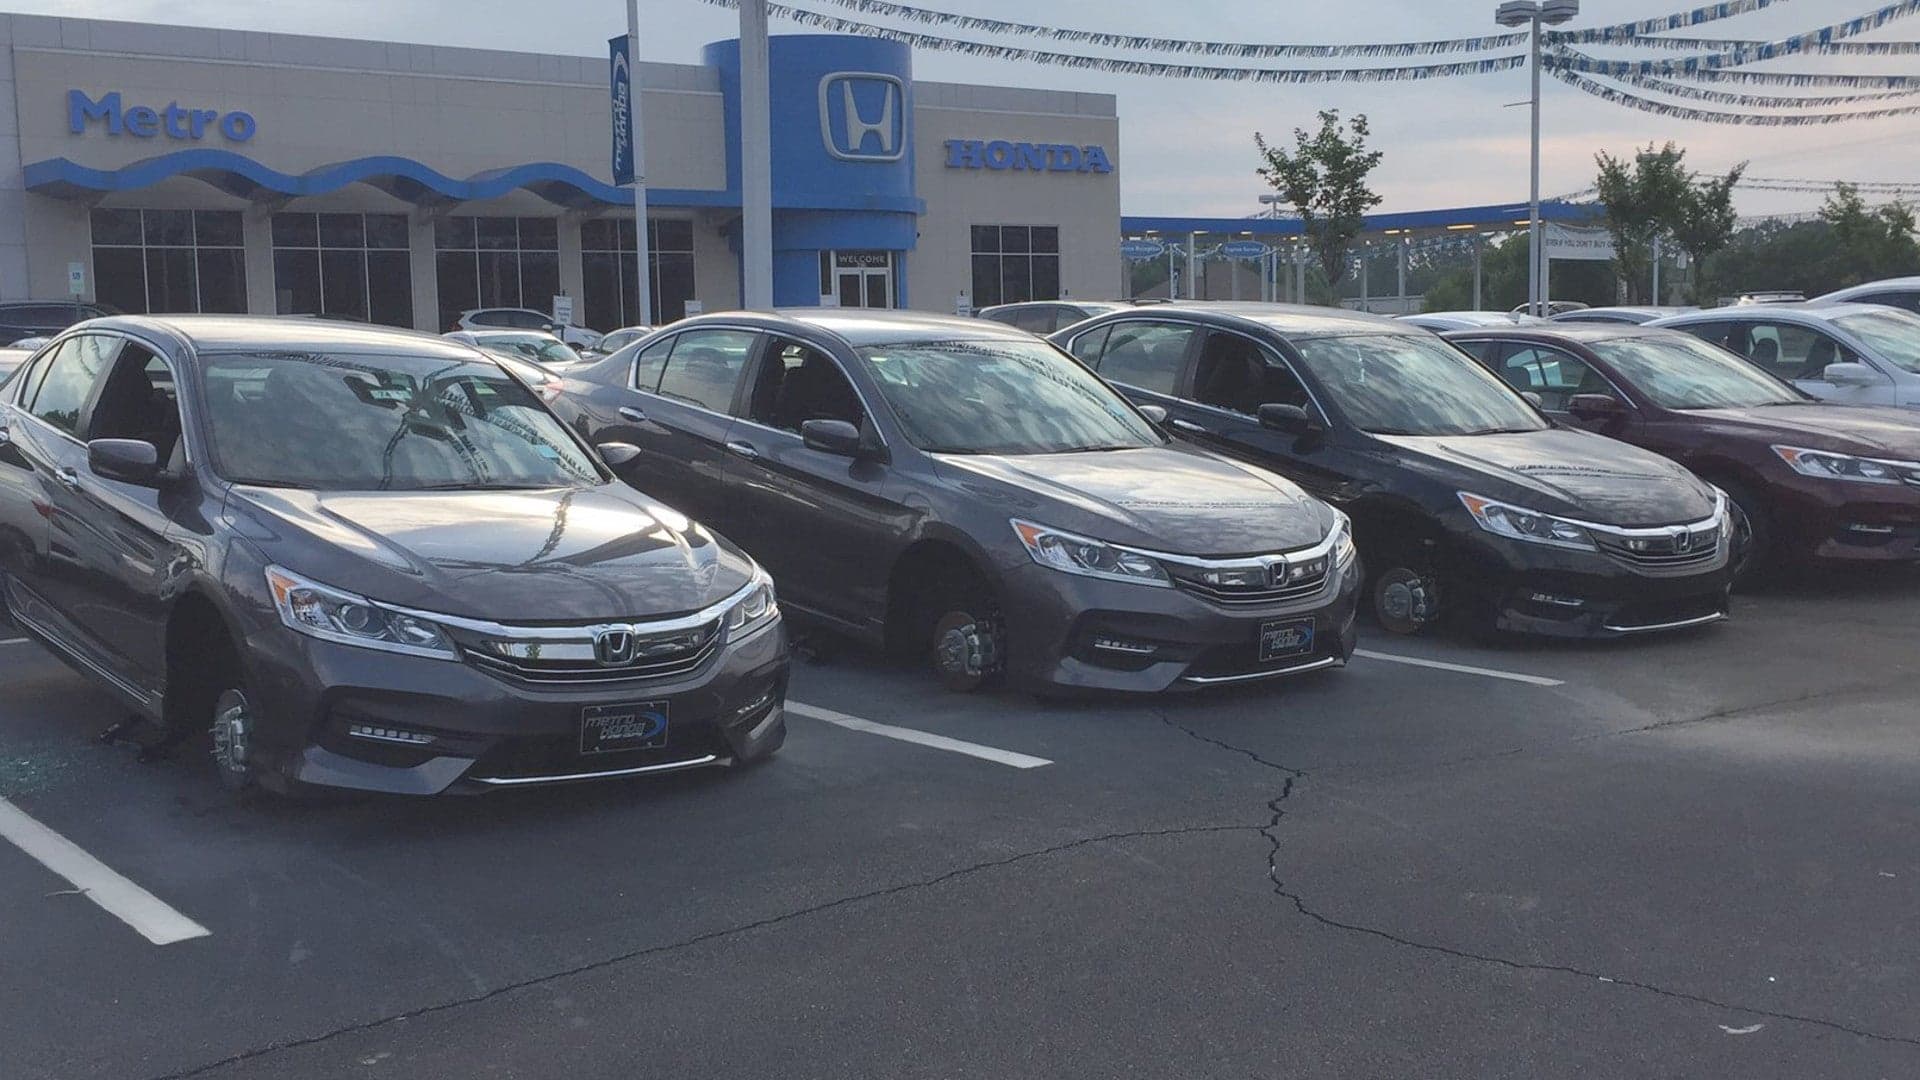 Thieves Nab At Least 16 Wheels Off Cars at Honda Dealership in Overnight Heist